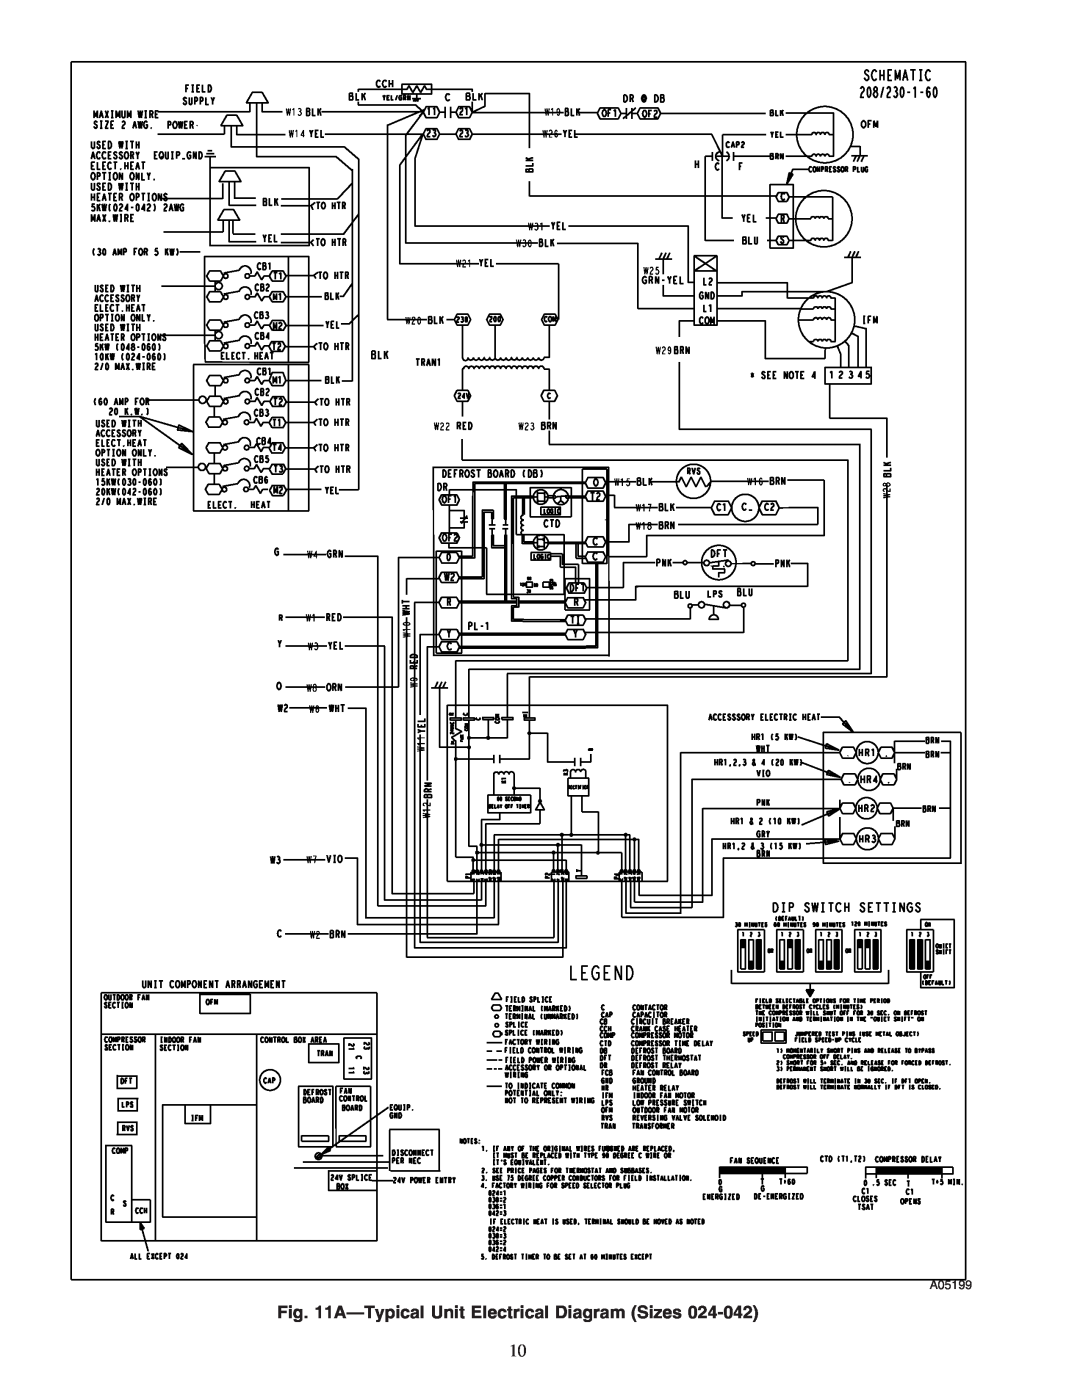 Carrier 50ZHA024-060 instruction manual A-TypicalUnit Electrical Diagram Sizes, A05199 